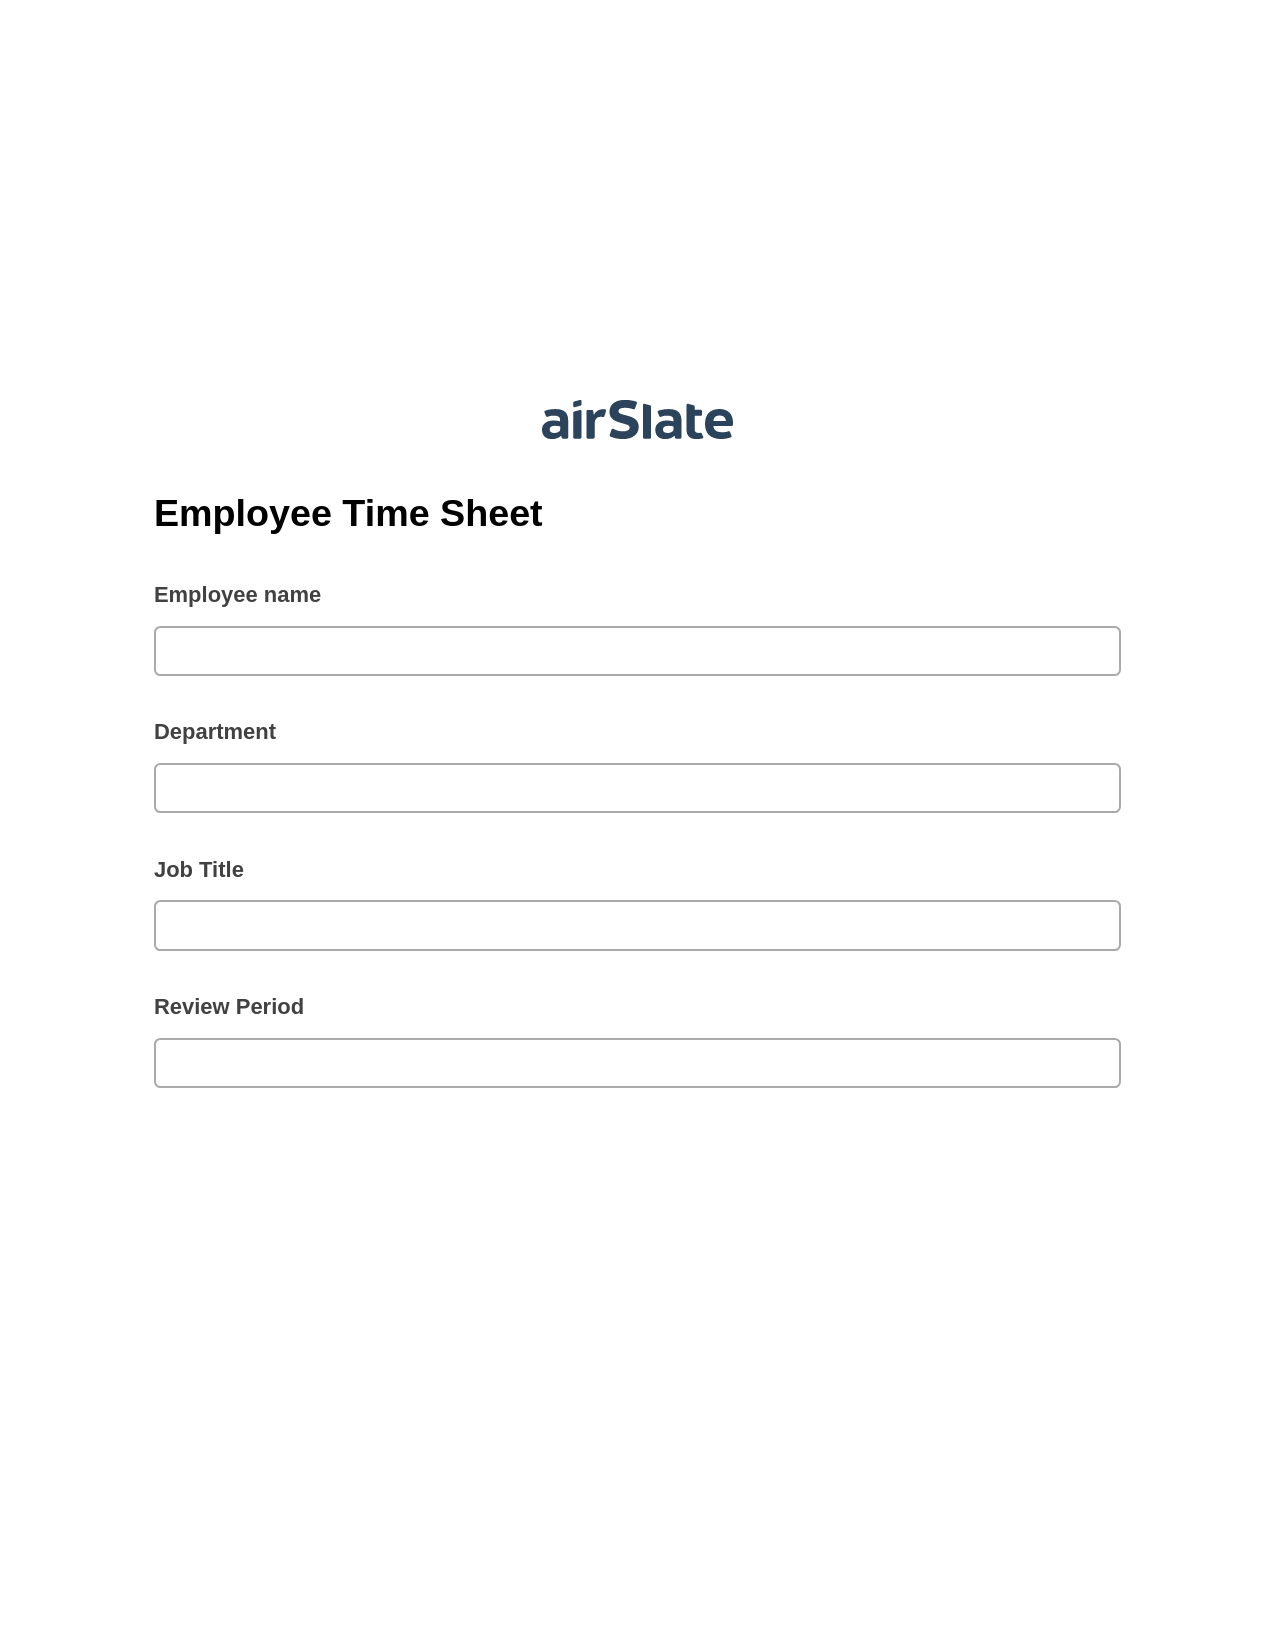 Multirole Employee Time Sheet Pre-fill from Salesforce Records with SOQL Bot, Send a Slate with Roles Bot, Archive to Dropbox Bot